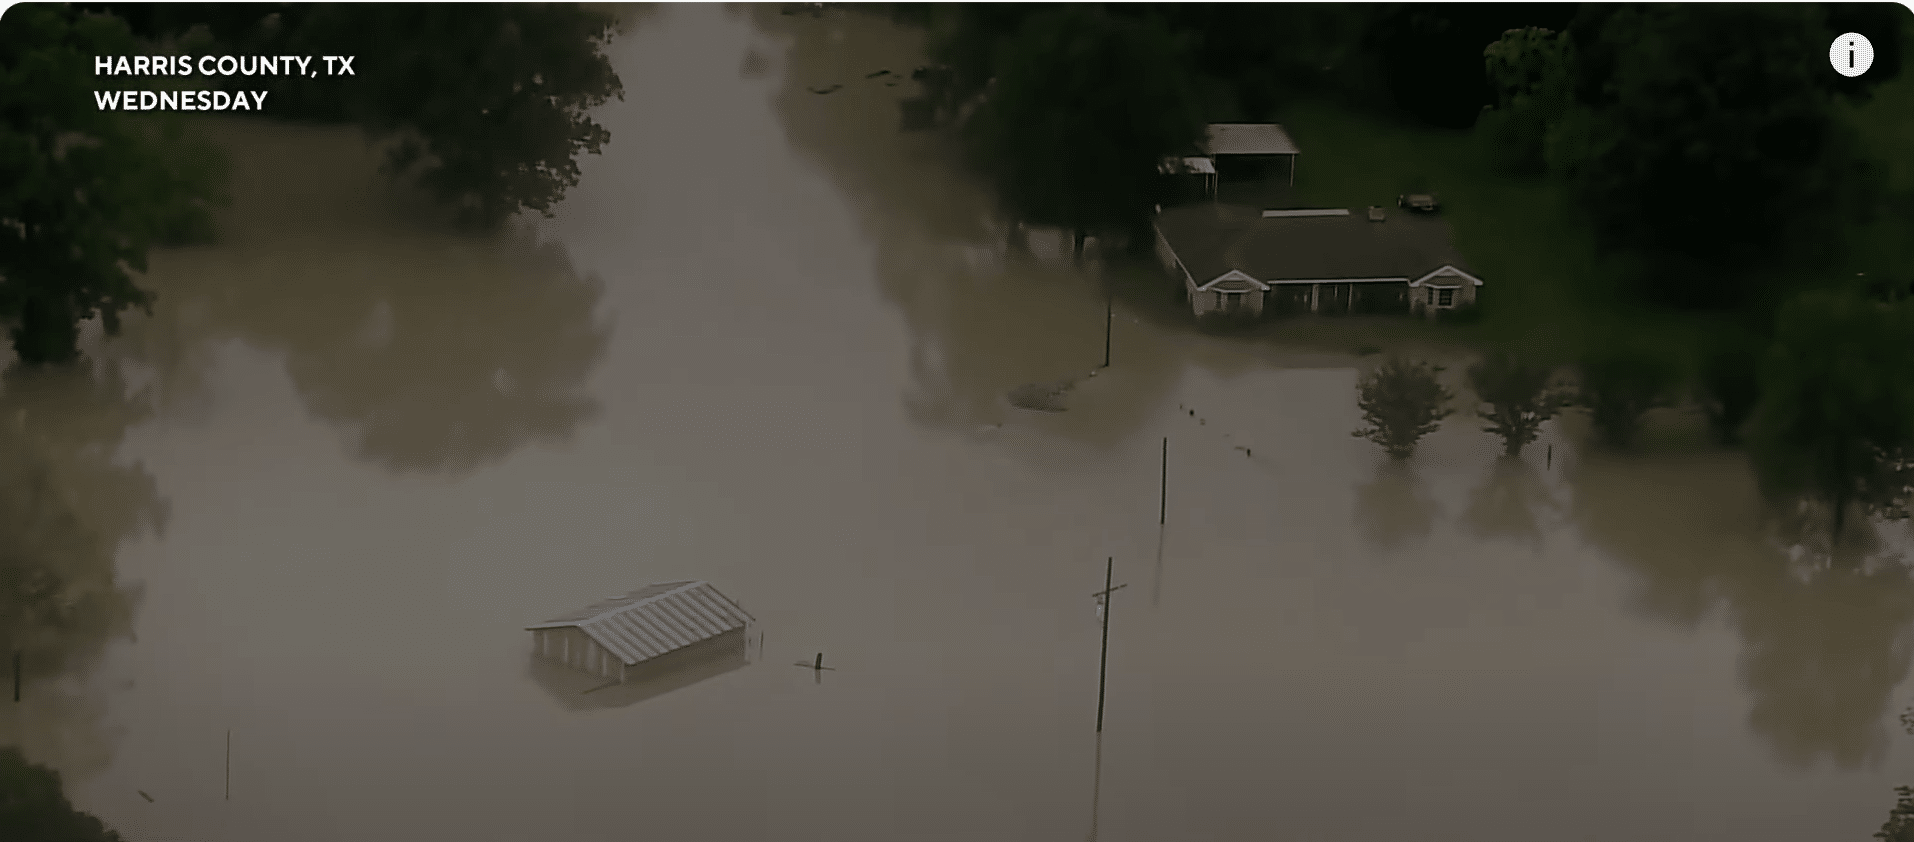 DEVELOPING: Houston area facing ‘life-threatening’ flood conditions as severe weather pummels Texas